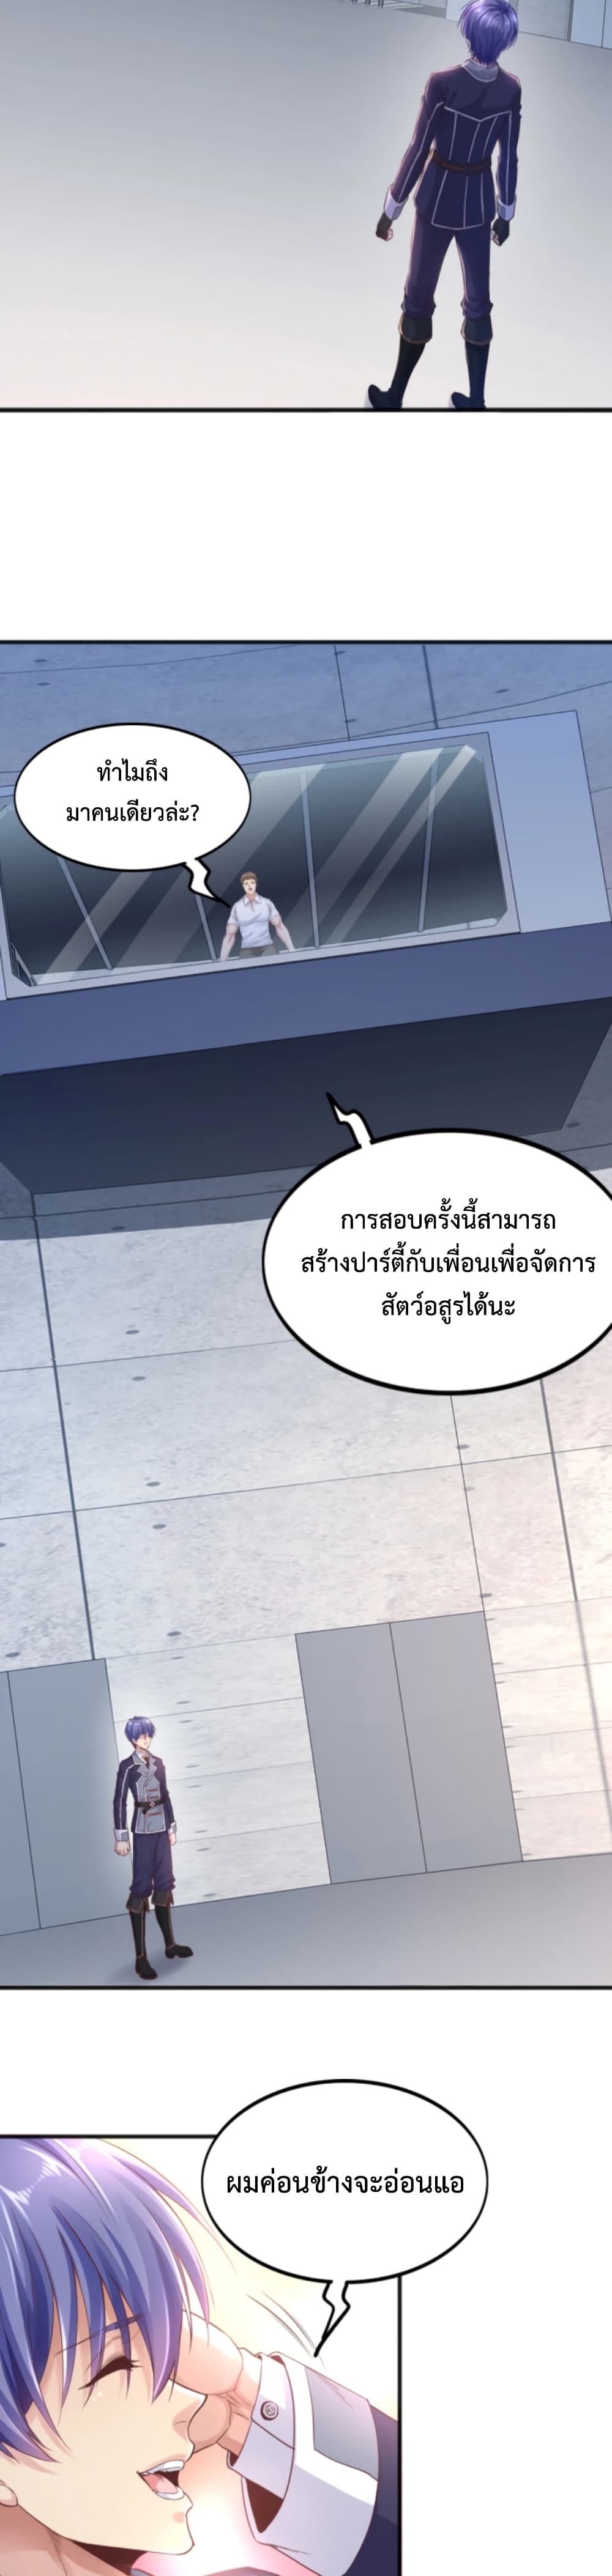 Level Up in Mirror ตอนที่ 7 (7)